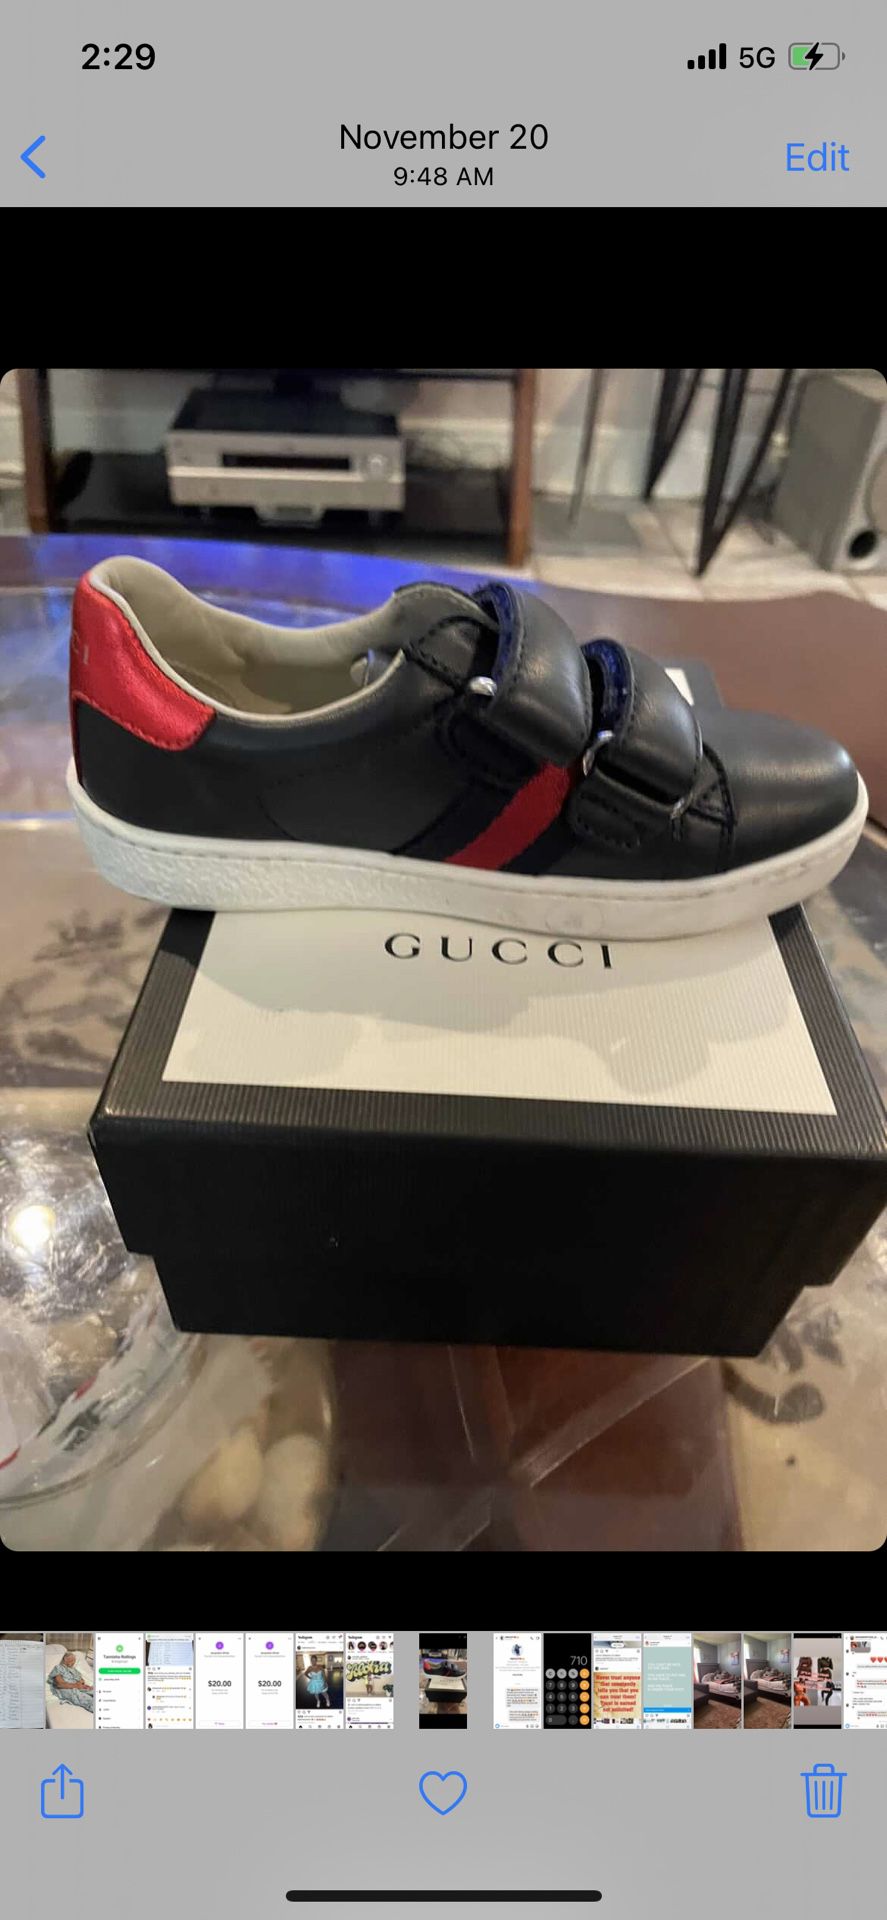 Toddler Gucci Size7 NavyBlue,Red &White 